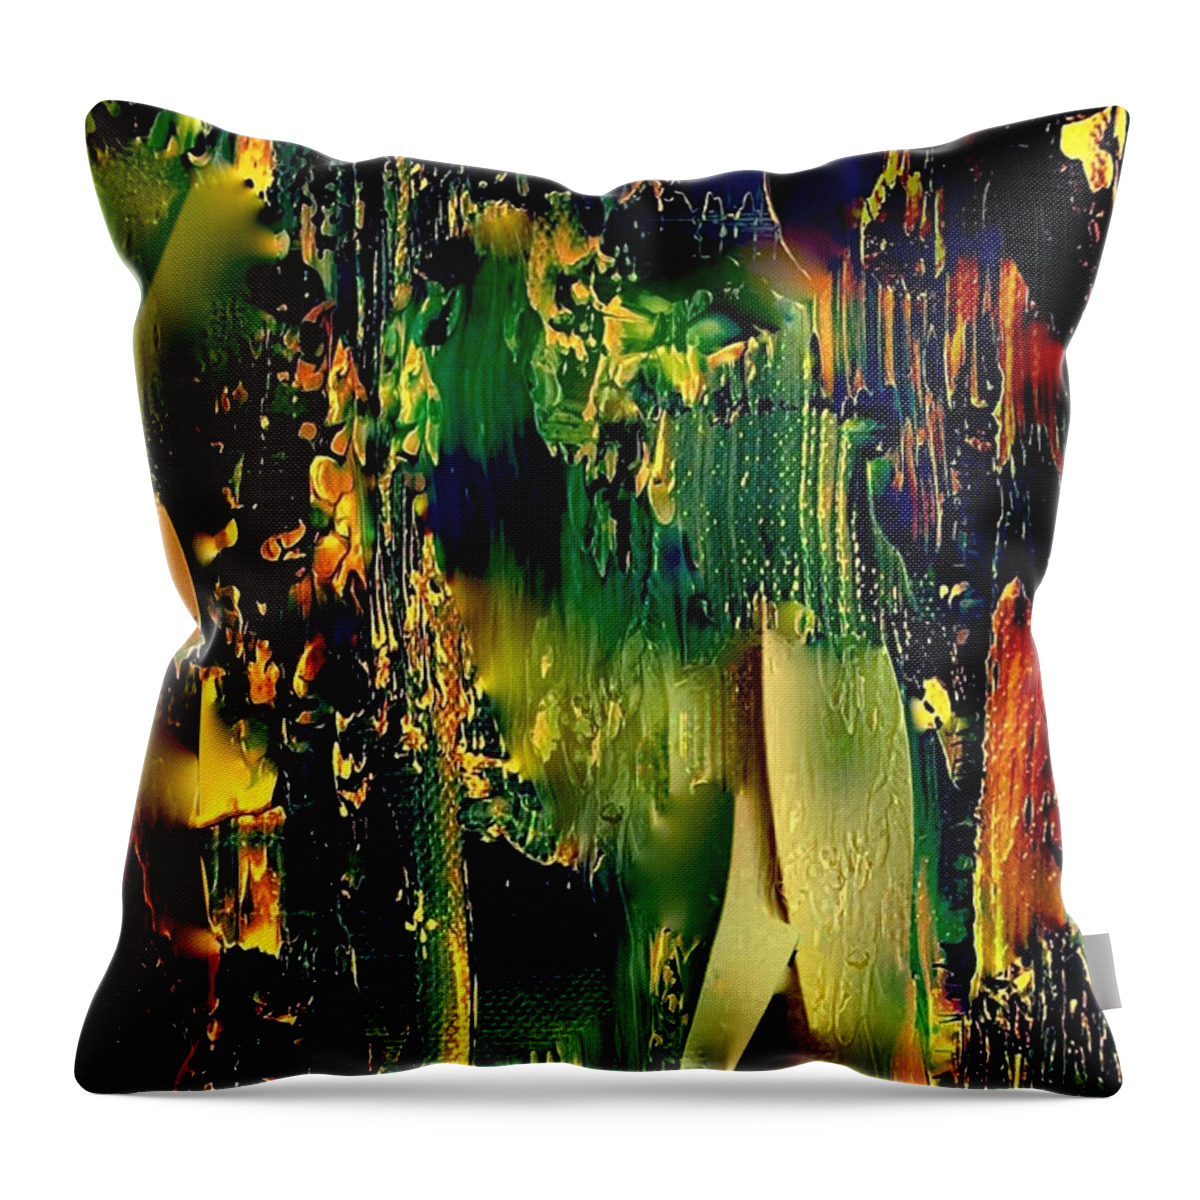 A-fine-art Throw Pillow featuring the mixed media Willing and Obedient by Catalina Walker